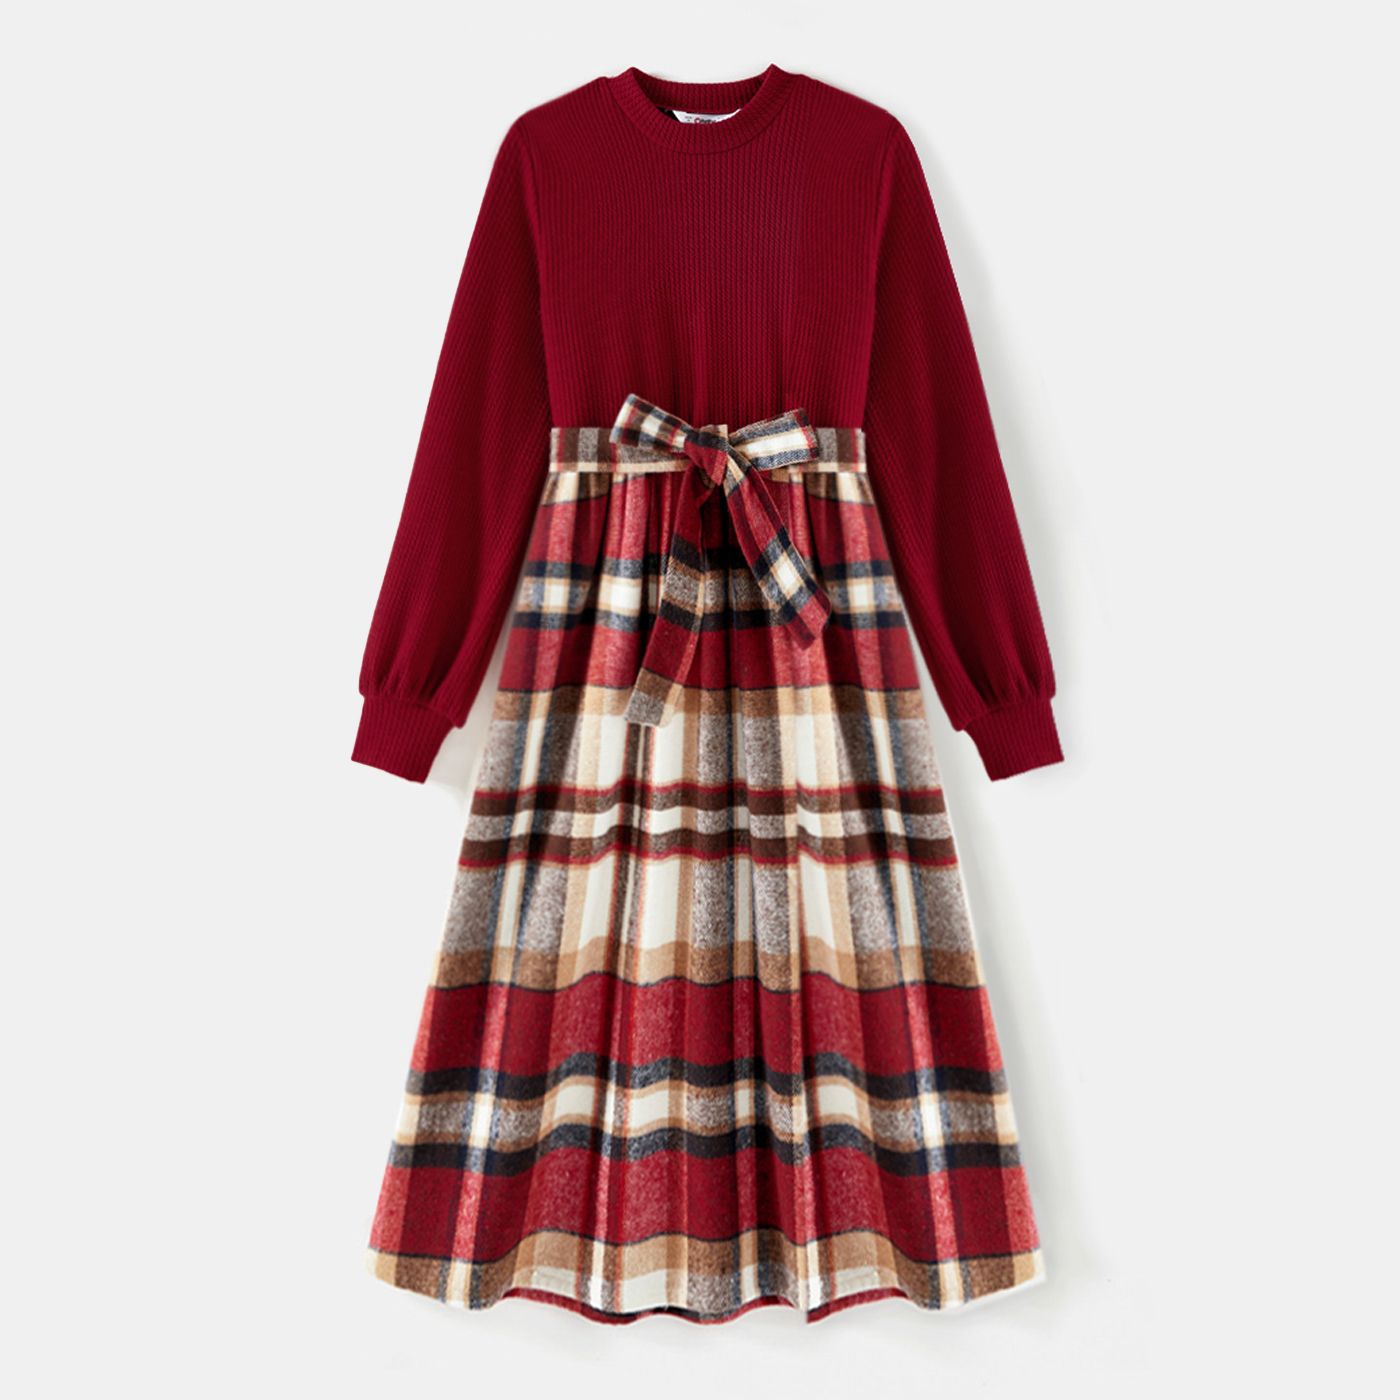 Family Matching Solid Ribbed Spliced Plaid Belted Dresses And Long-sleeve Button Up Shirts Sets